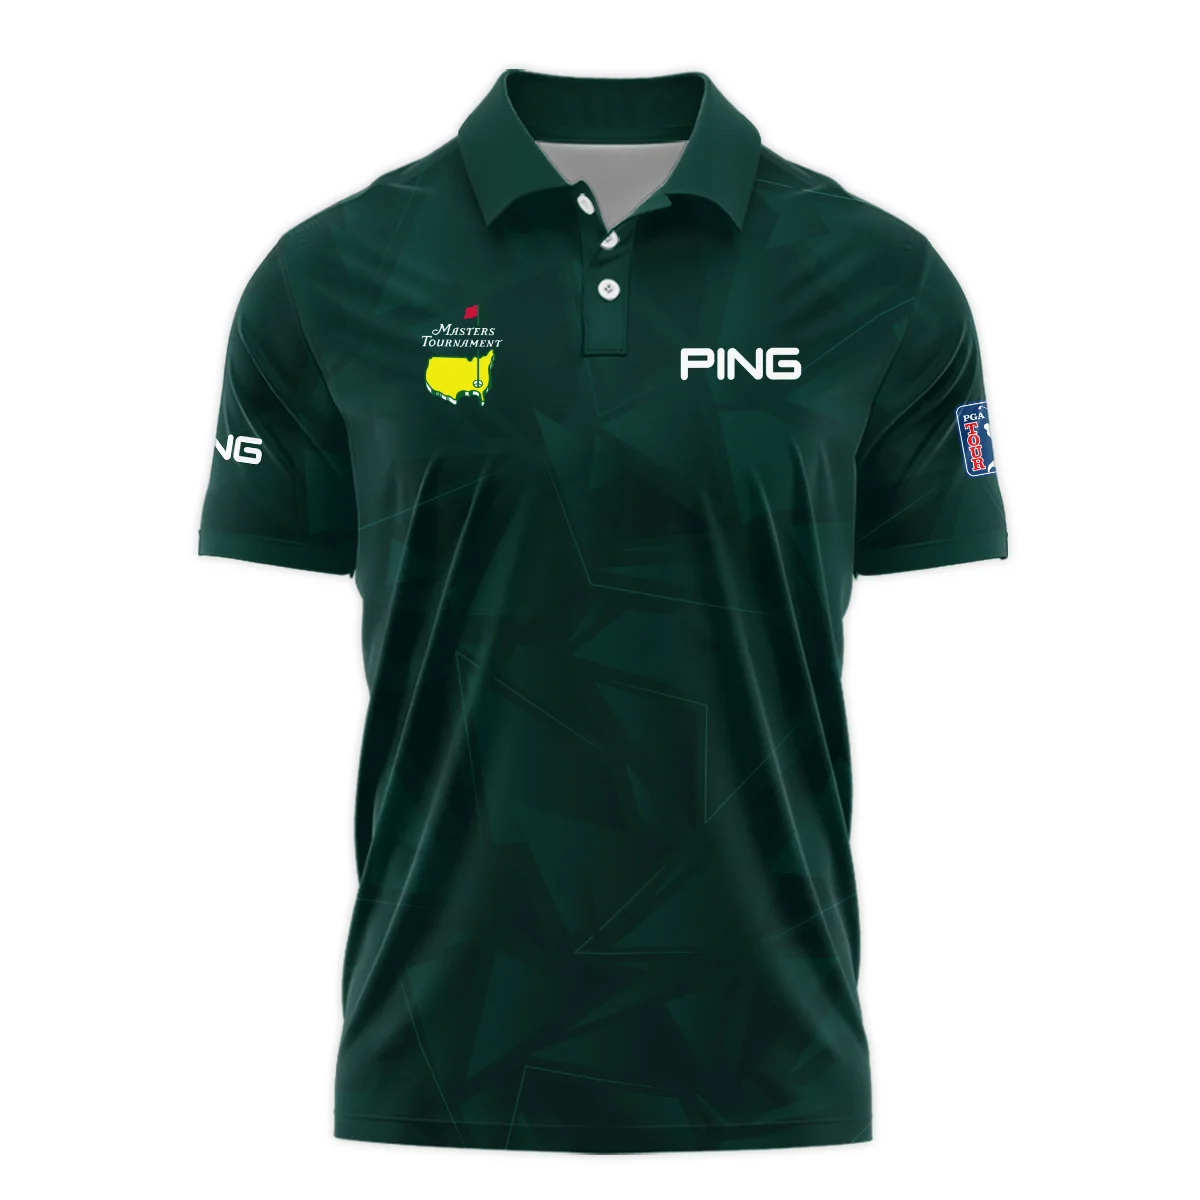 Dark Green Abstract Sport Masters Tournament Ping Vneck Long Polo Shirt Style Classic Long Polo Shirt For Men